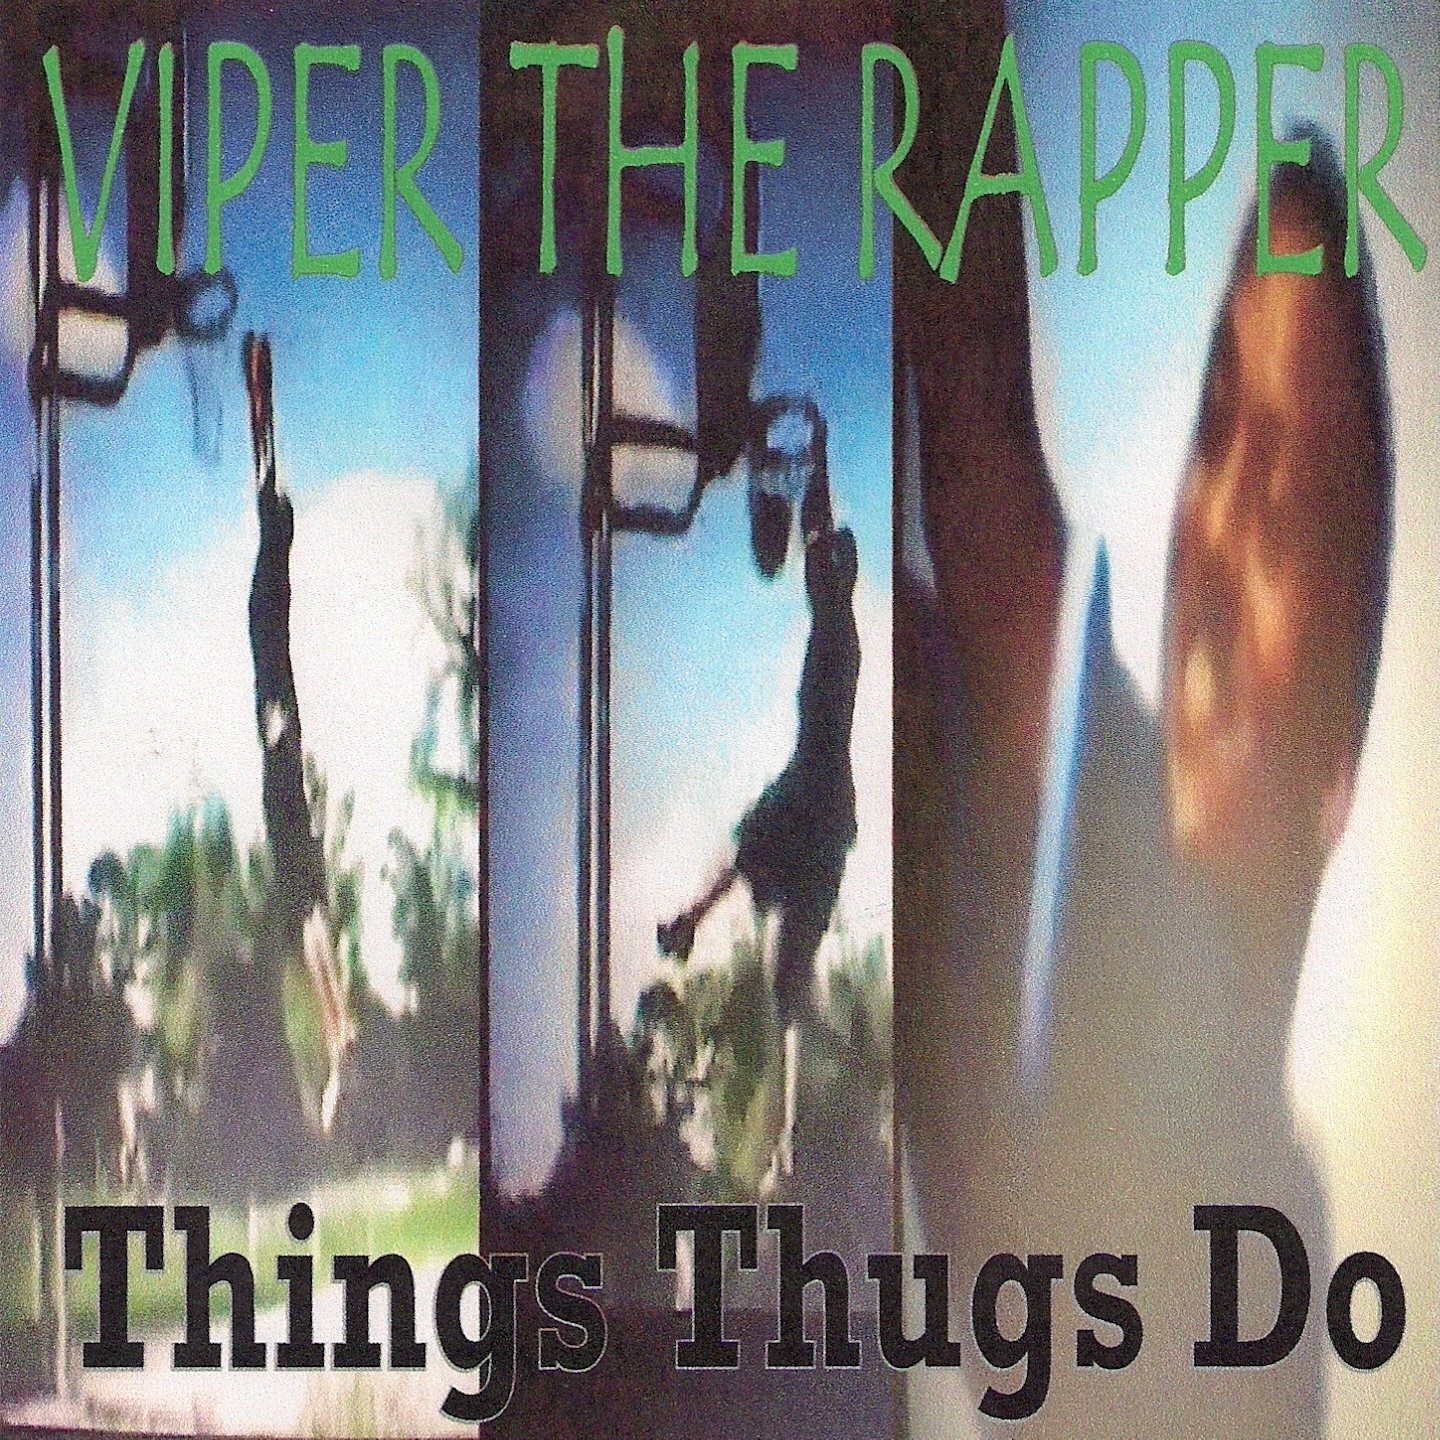 Viper The Rapper - Free Movers Inc.: lyrics and songs